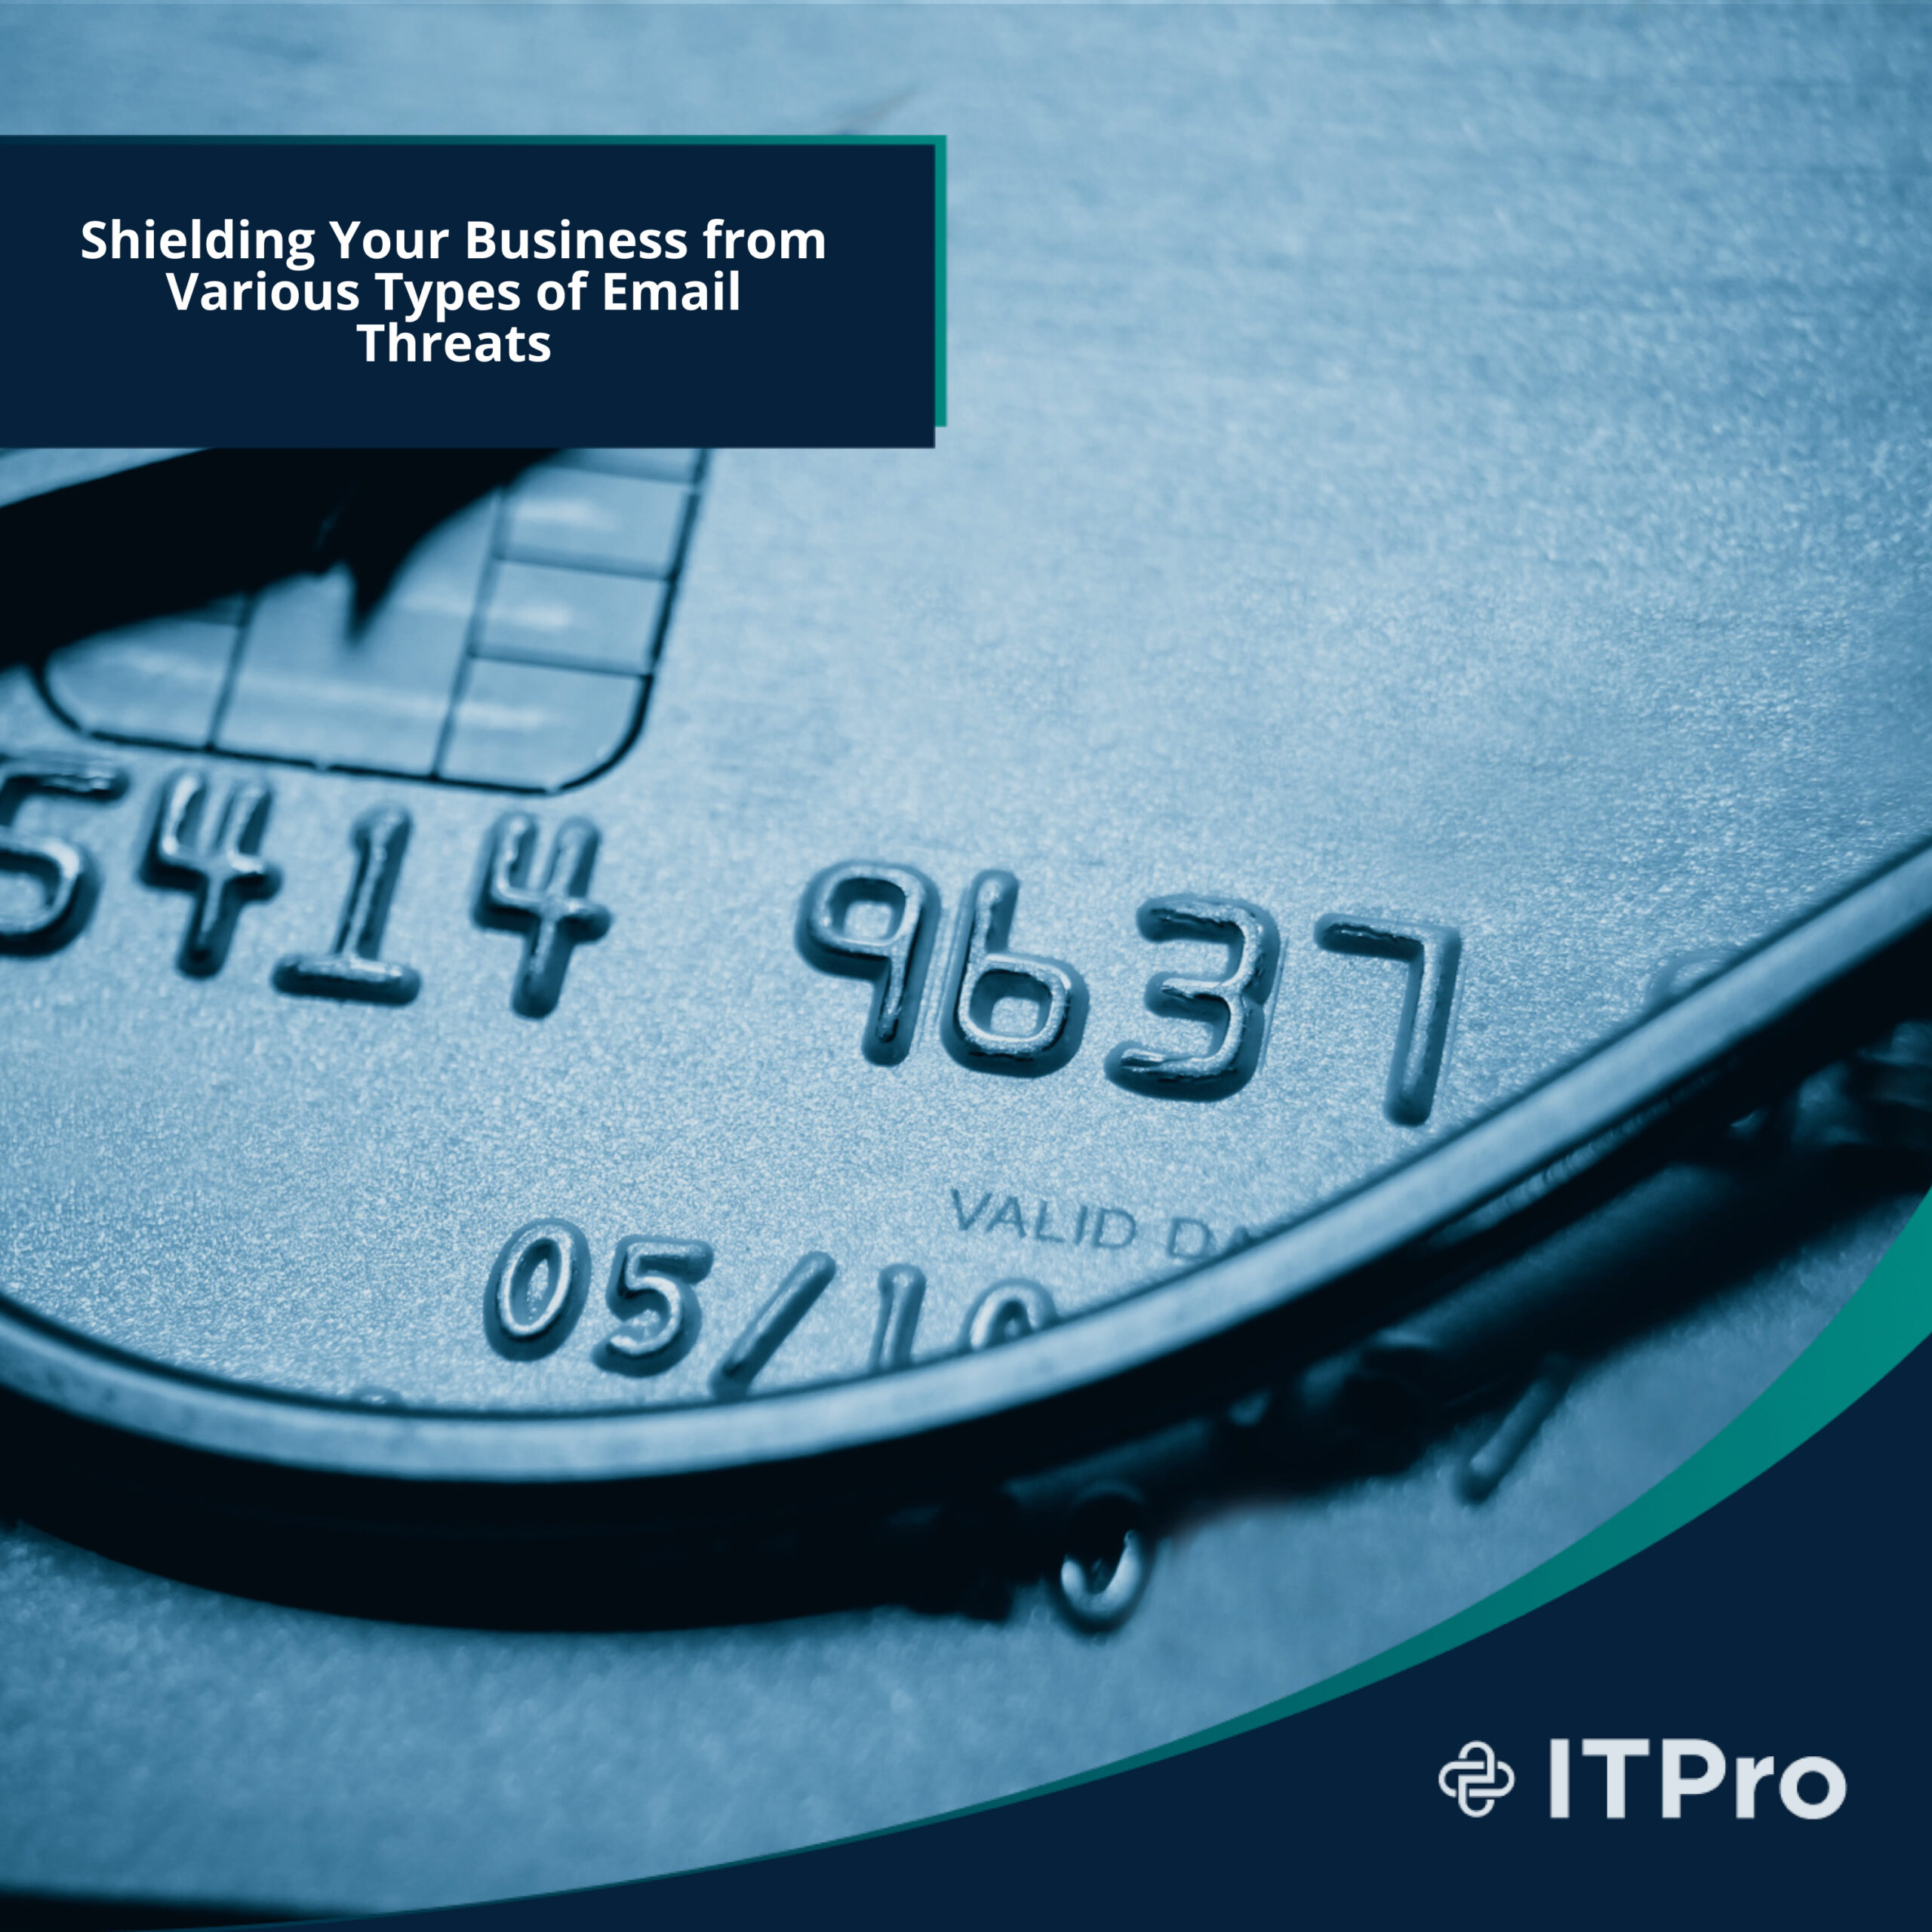 Shielding Your Business from Various Types of Email Threats